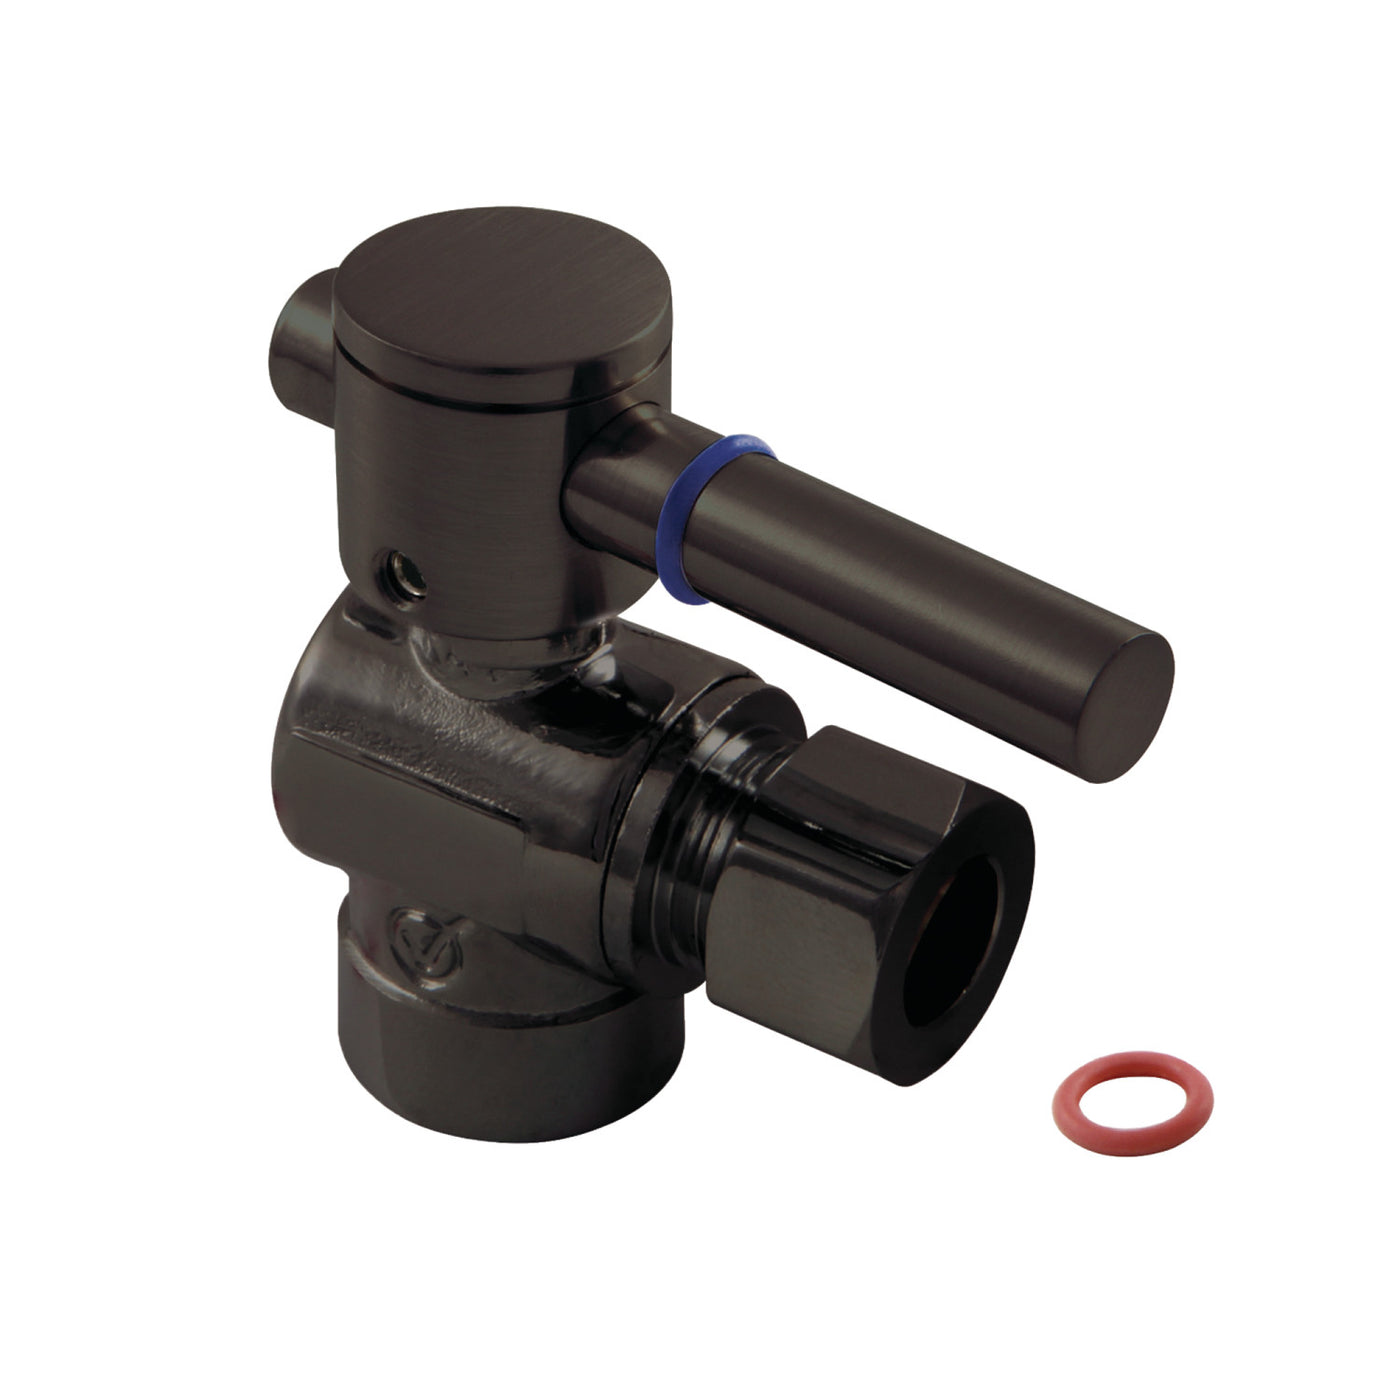 Elements of Design ECC43205DL 1/2-Inch Sweat x 3/8-Inch OD Comp Angle Stop Valve, Oil Rubbed Bronze